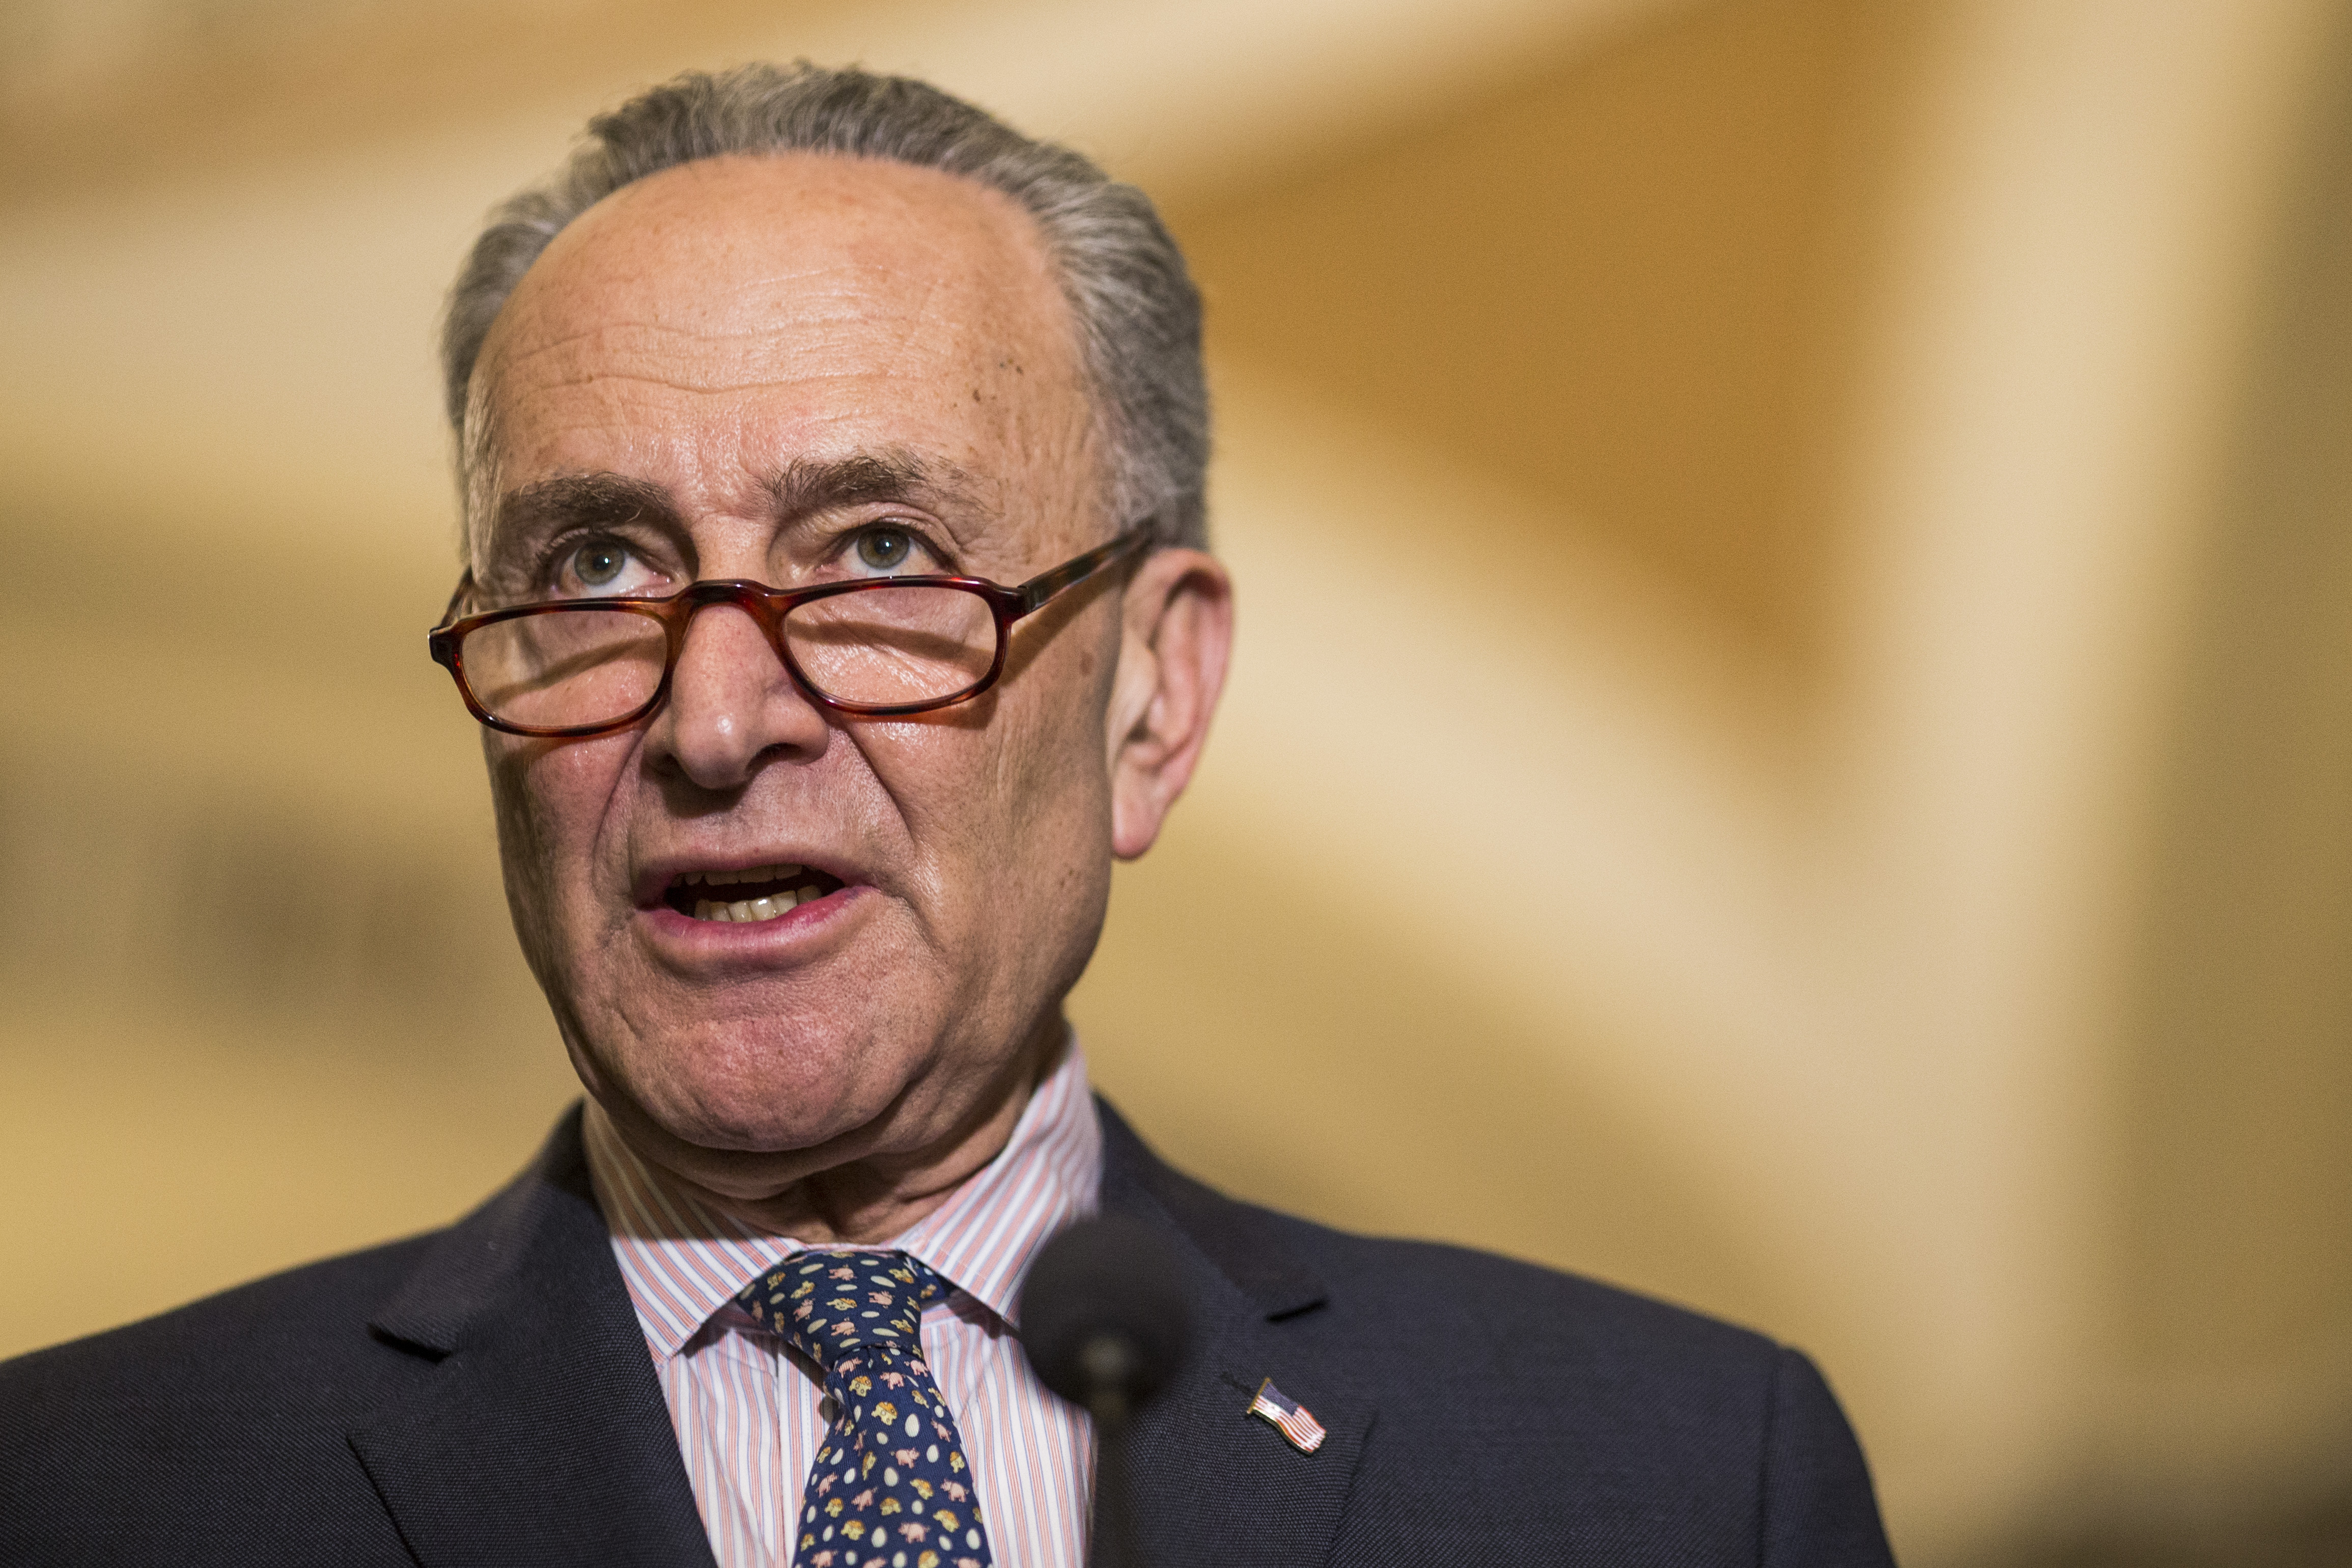 Senate Minority Leader Chuck Schumer (D-NY) speaks during a news conference following weekly policy luncheons on Capitol Hill on April 10, 2018 in Washington, D.C. (Zach Gibson/Getty Images)